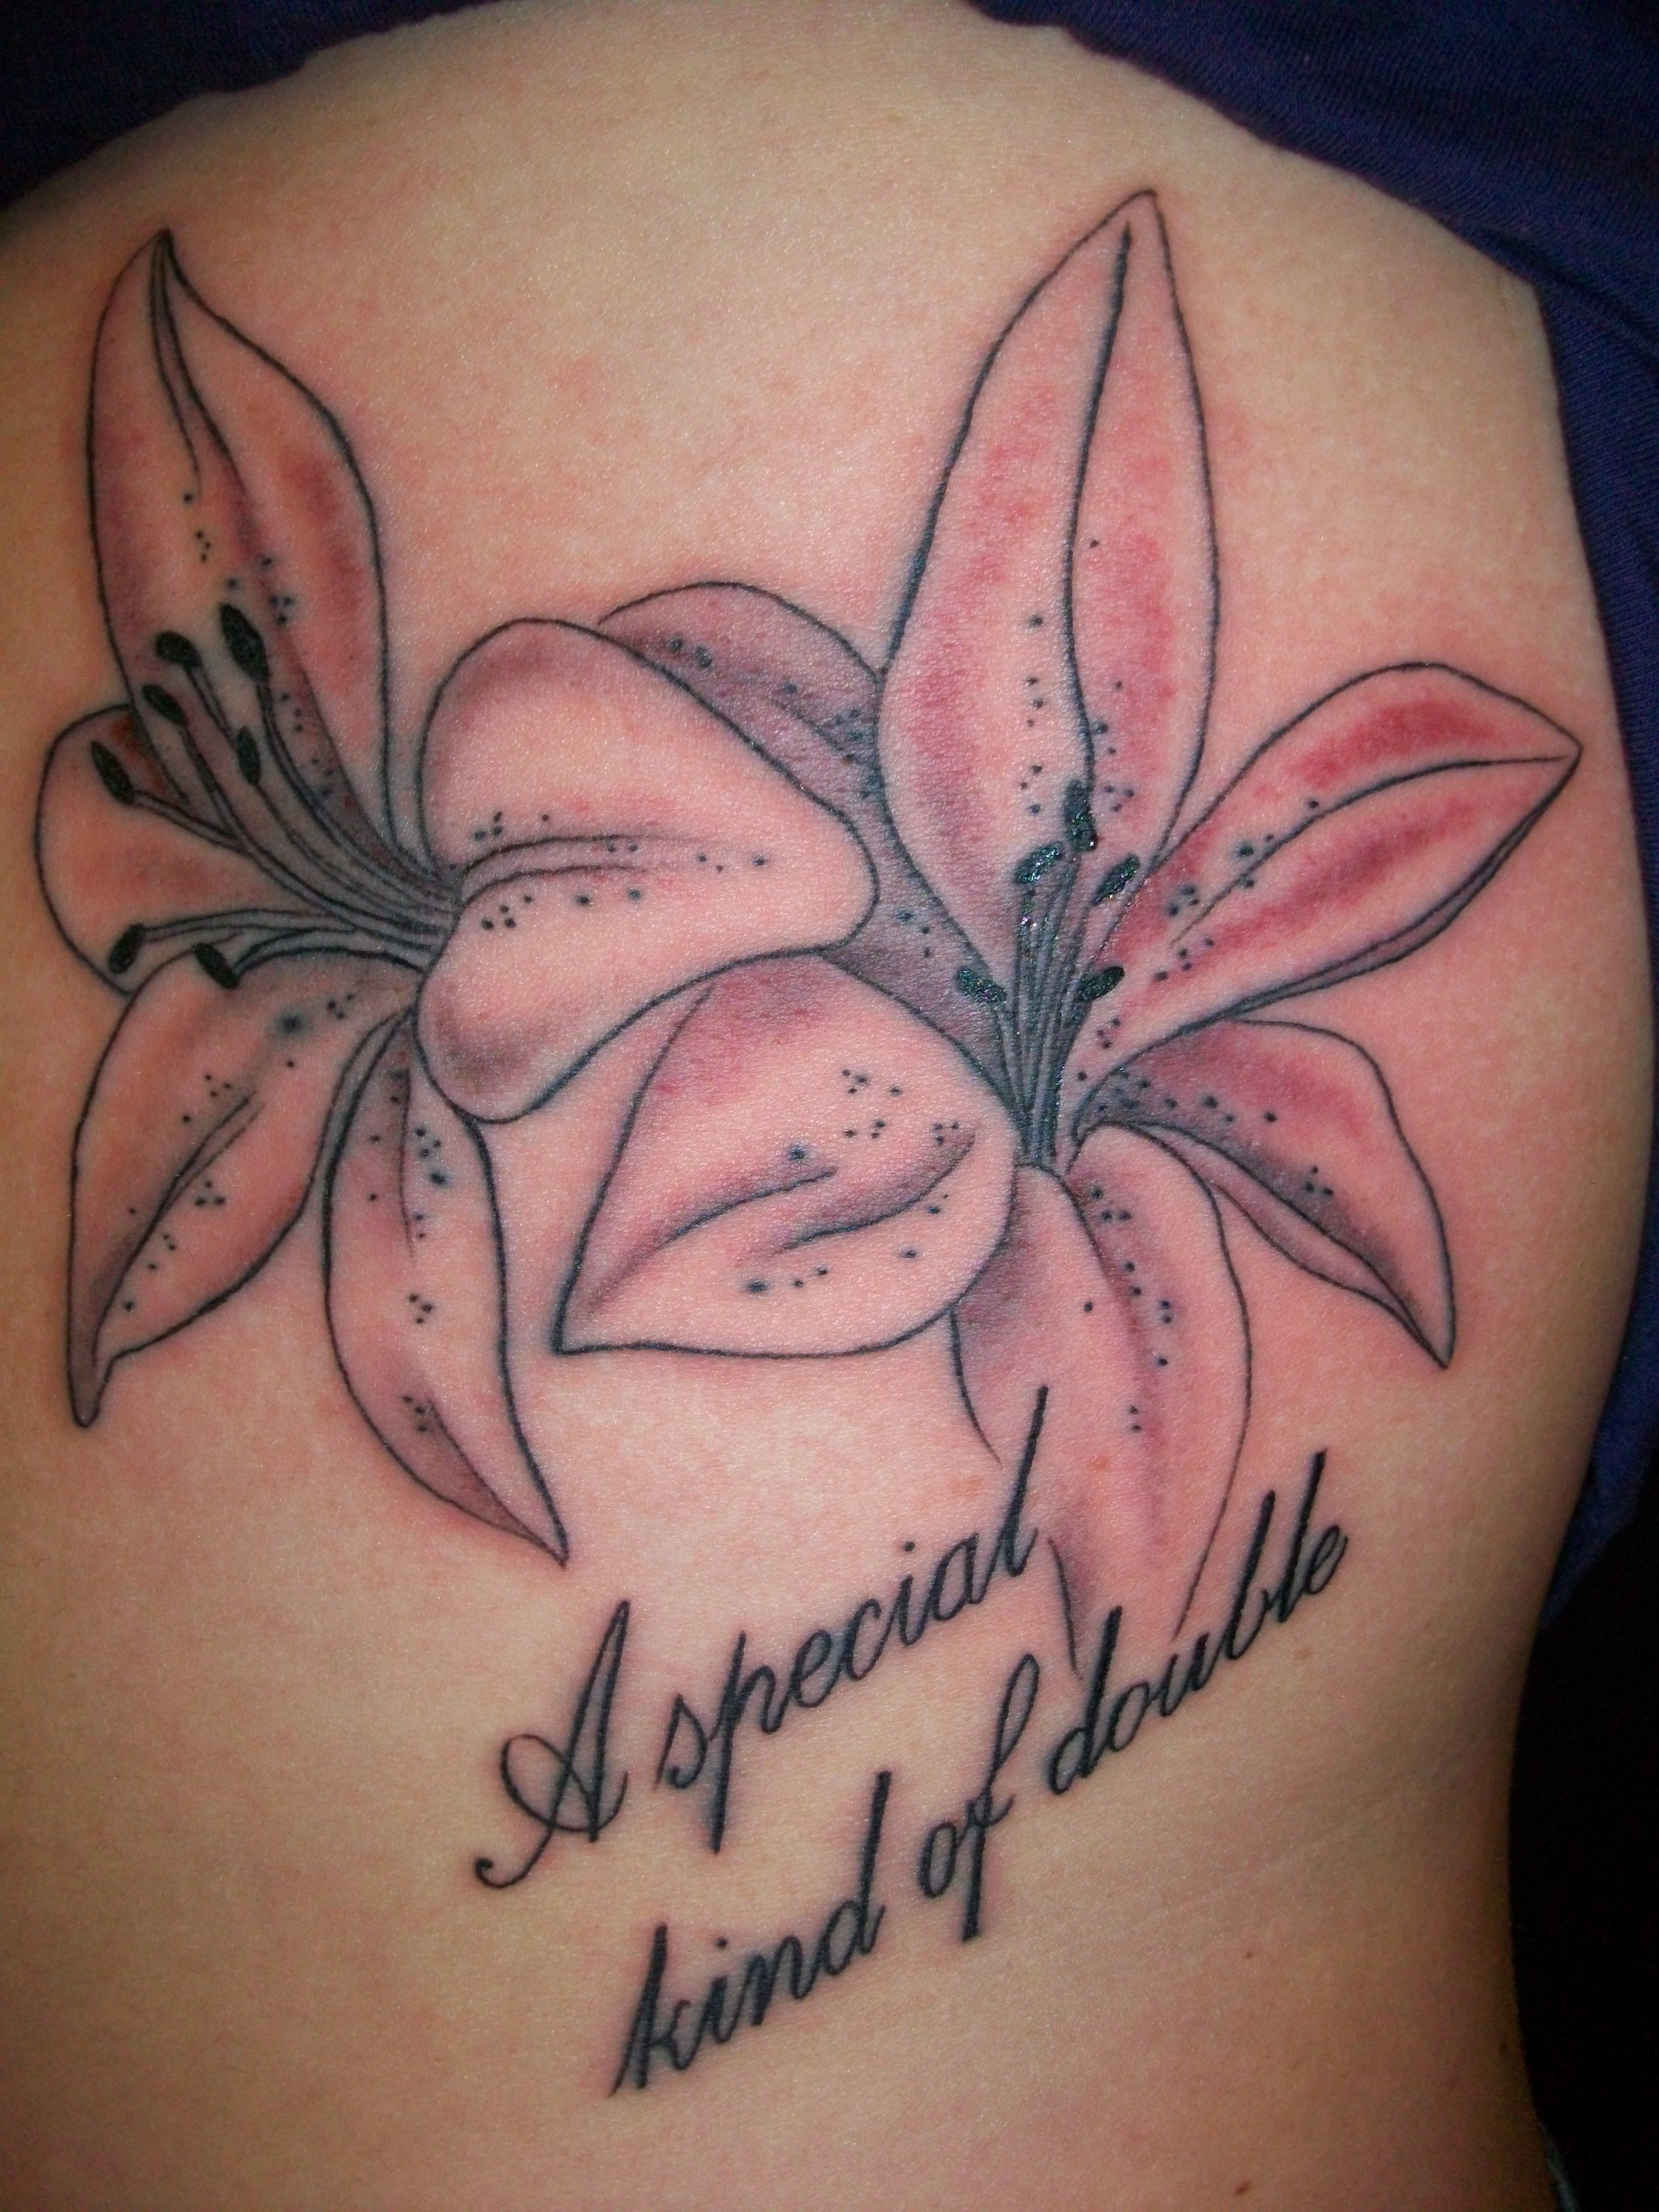 Red flowers abd quotes on back